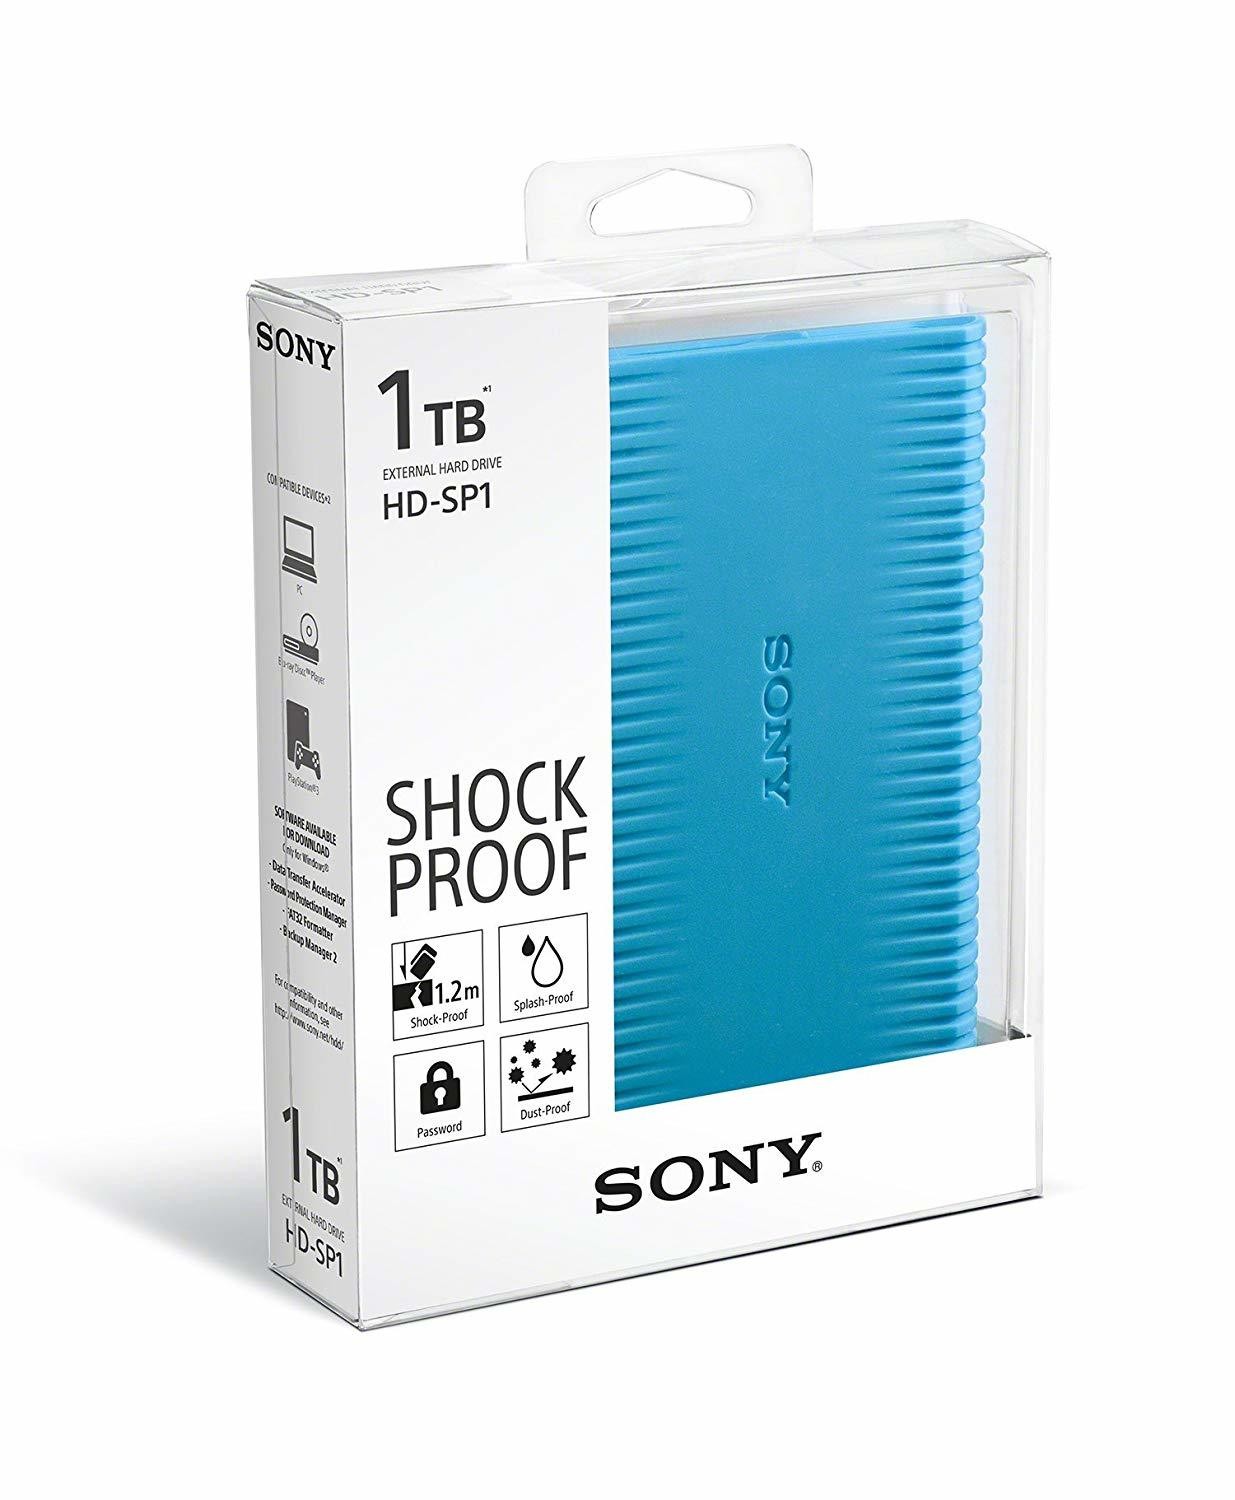 Sony 1TB HD-SP1 Shock-Proof External Hard Drive with Backup Manager, Blue